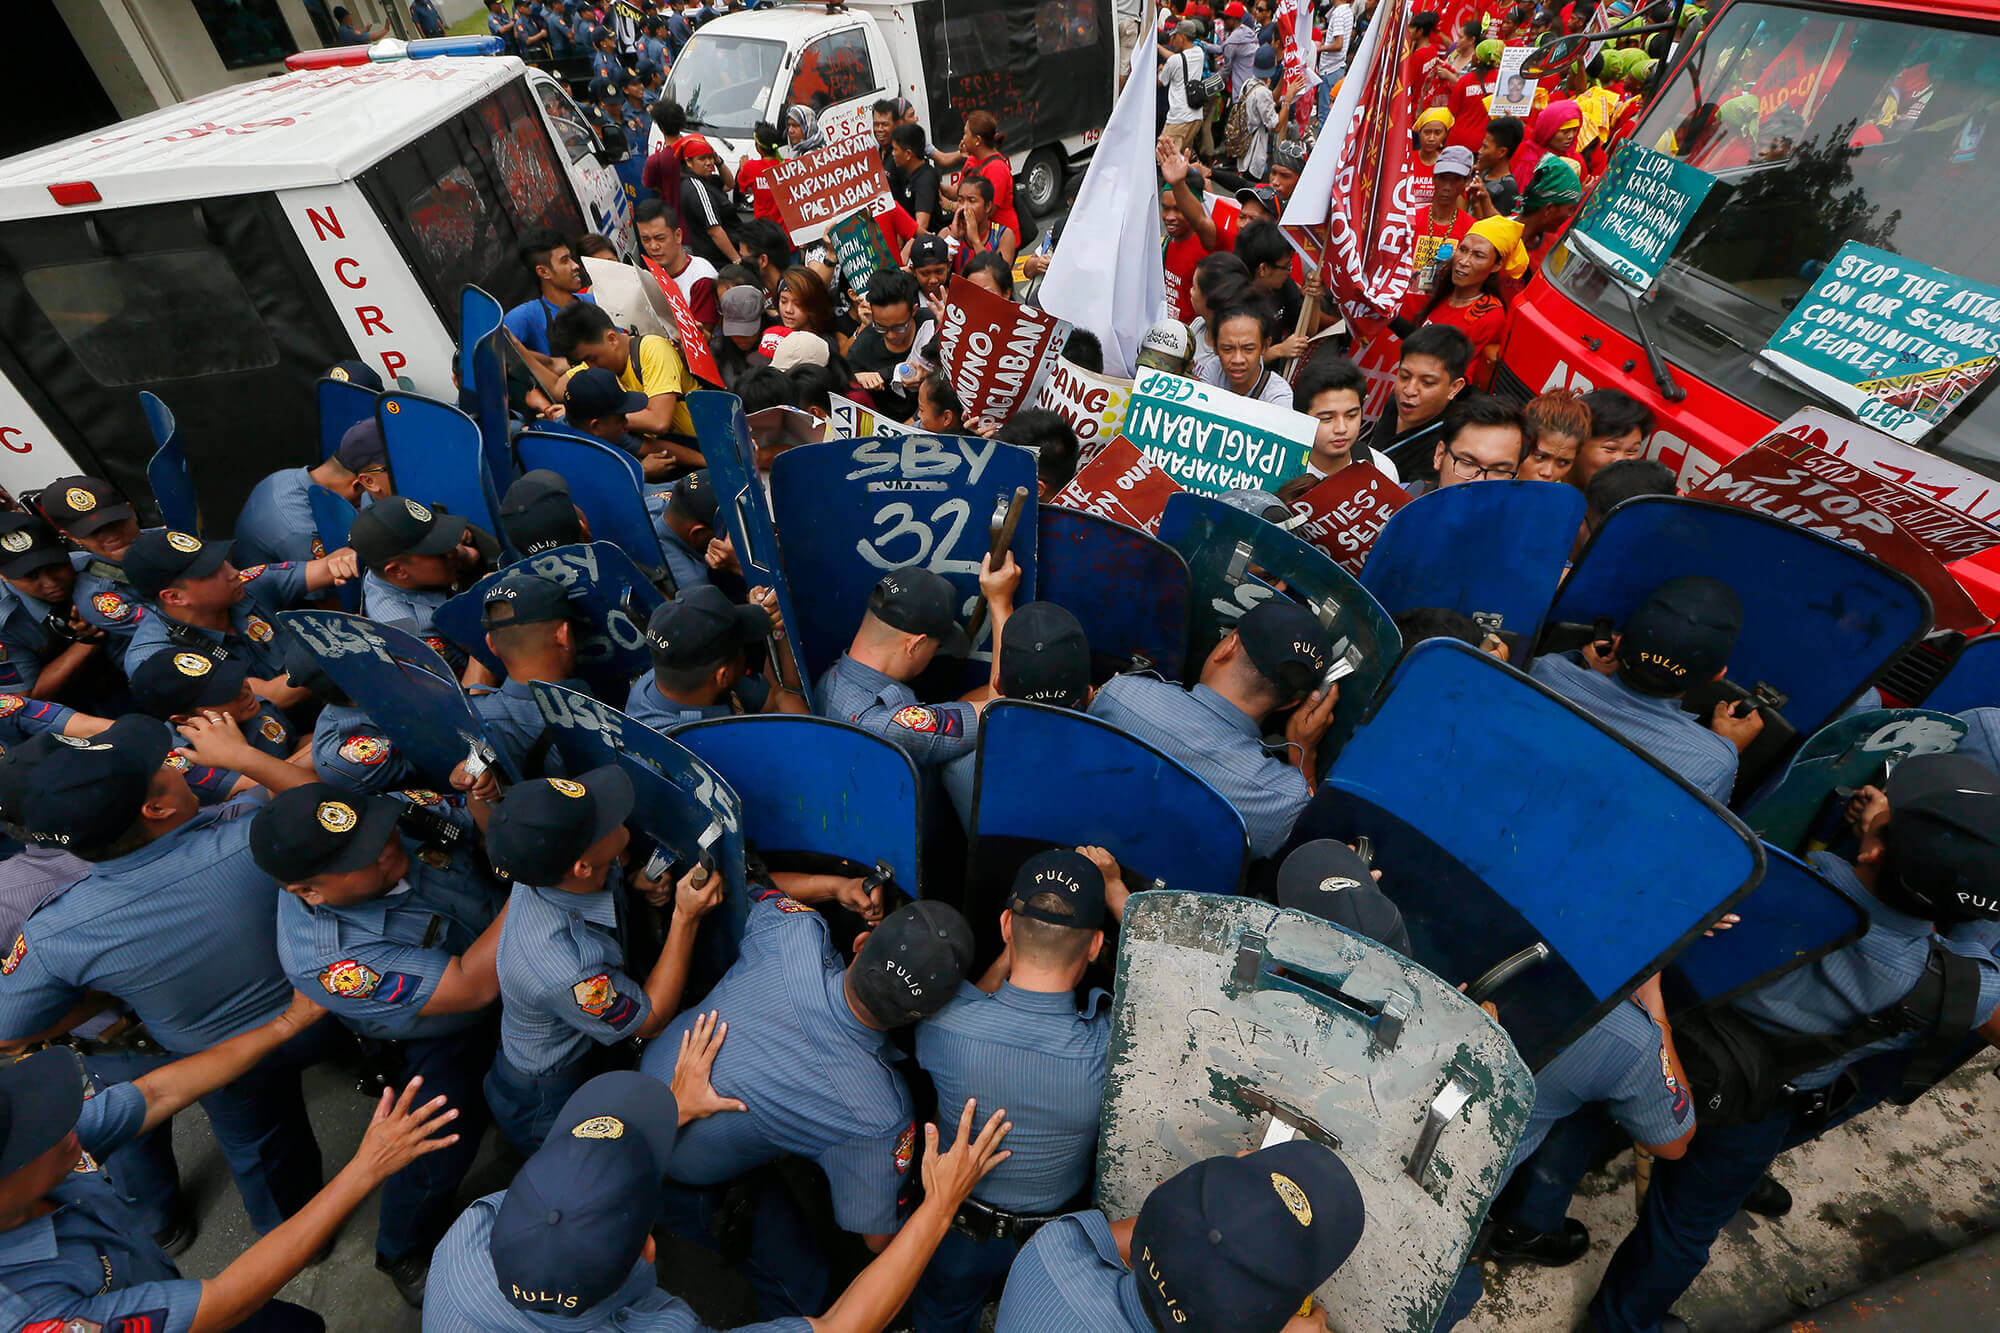 Protesters and police clashing in the Philippines